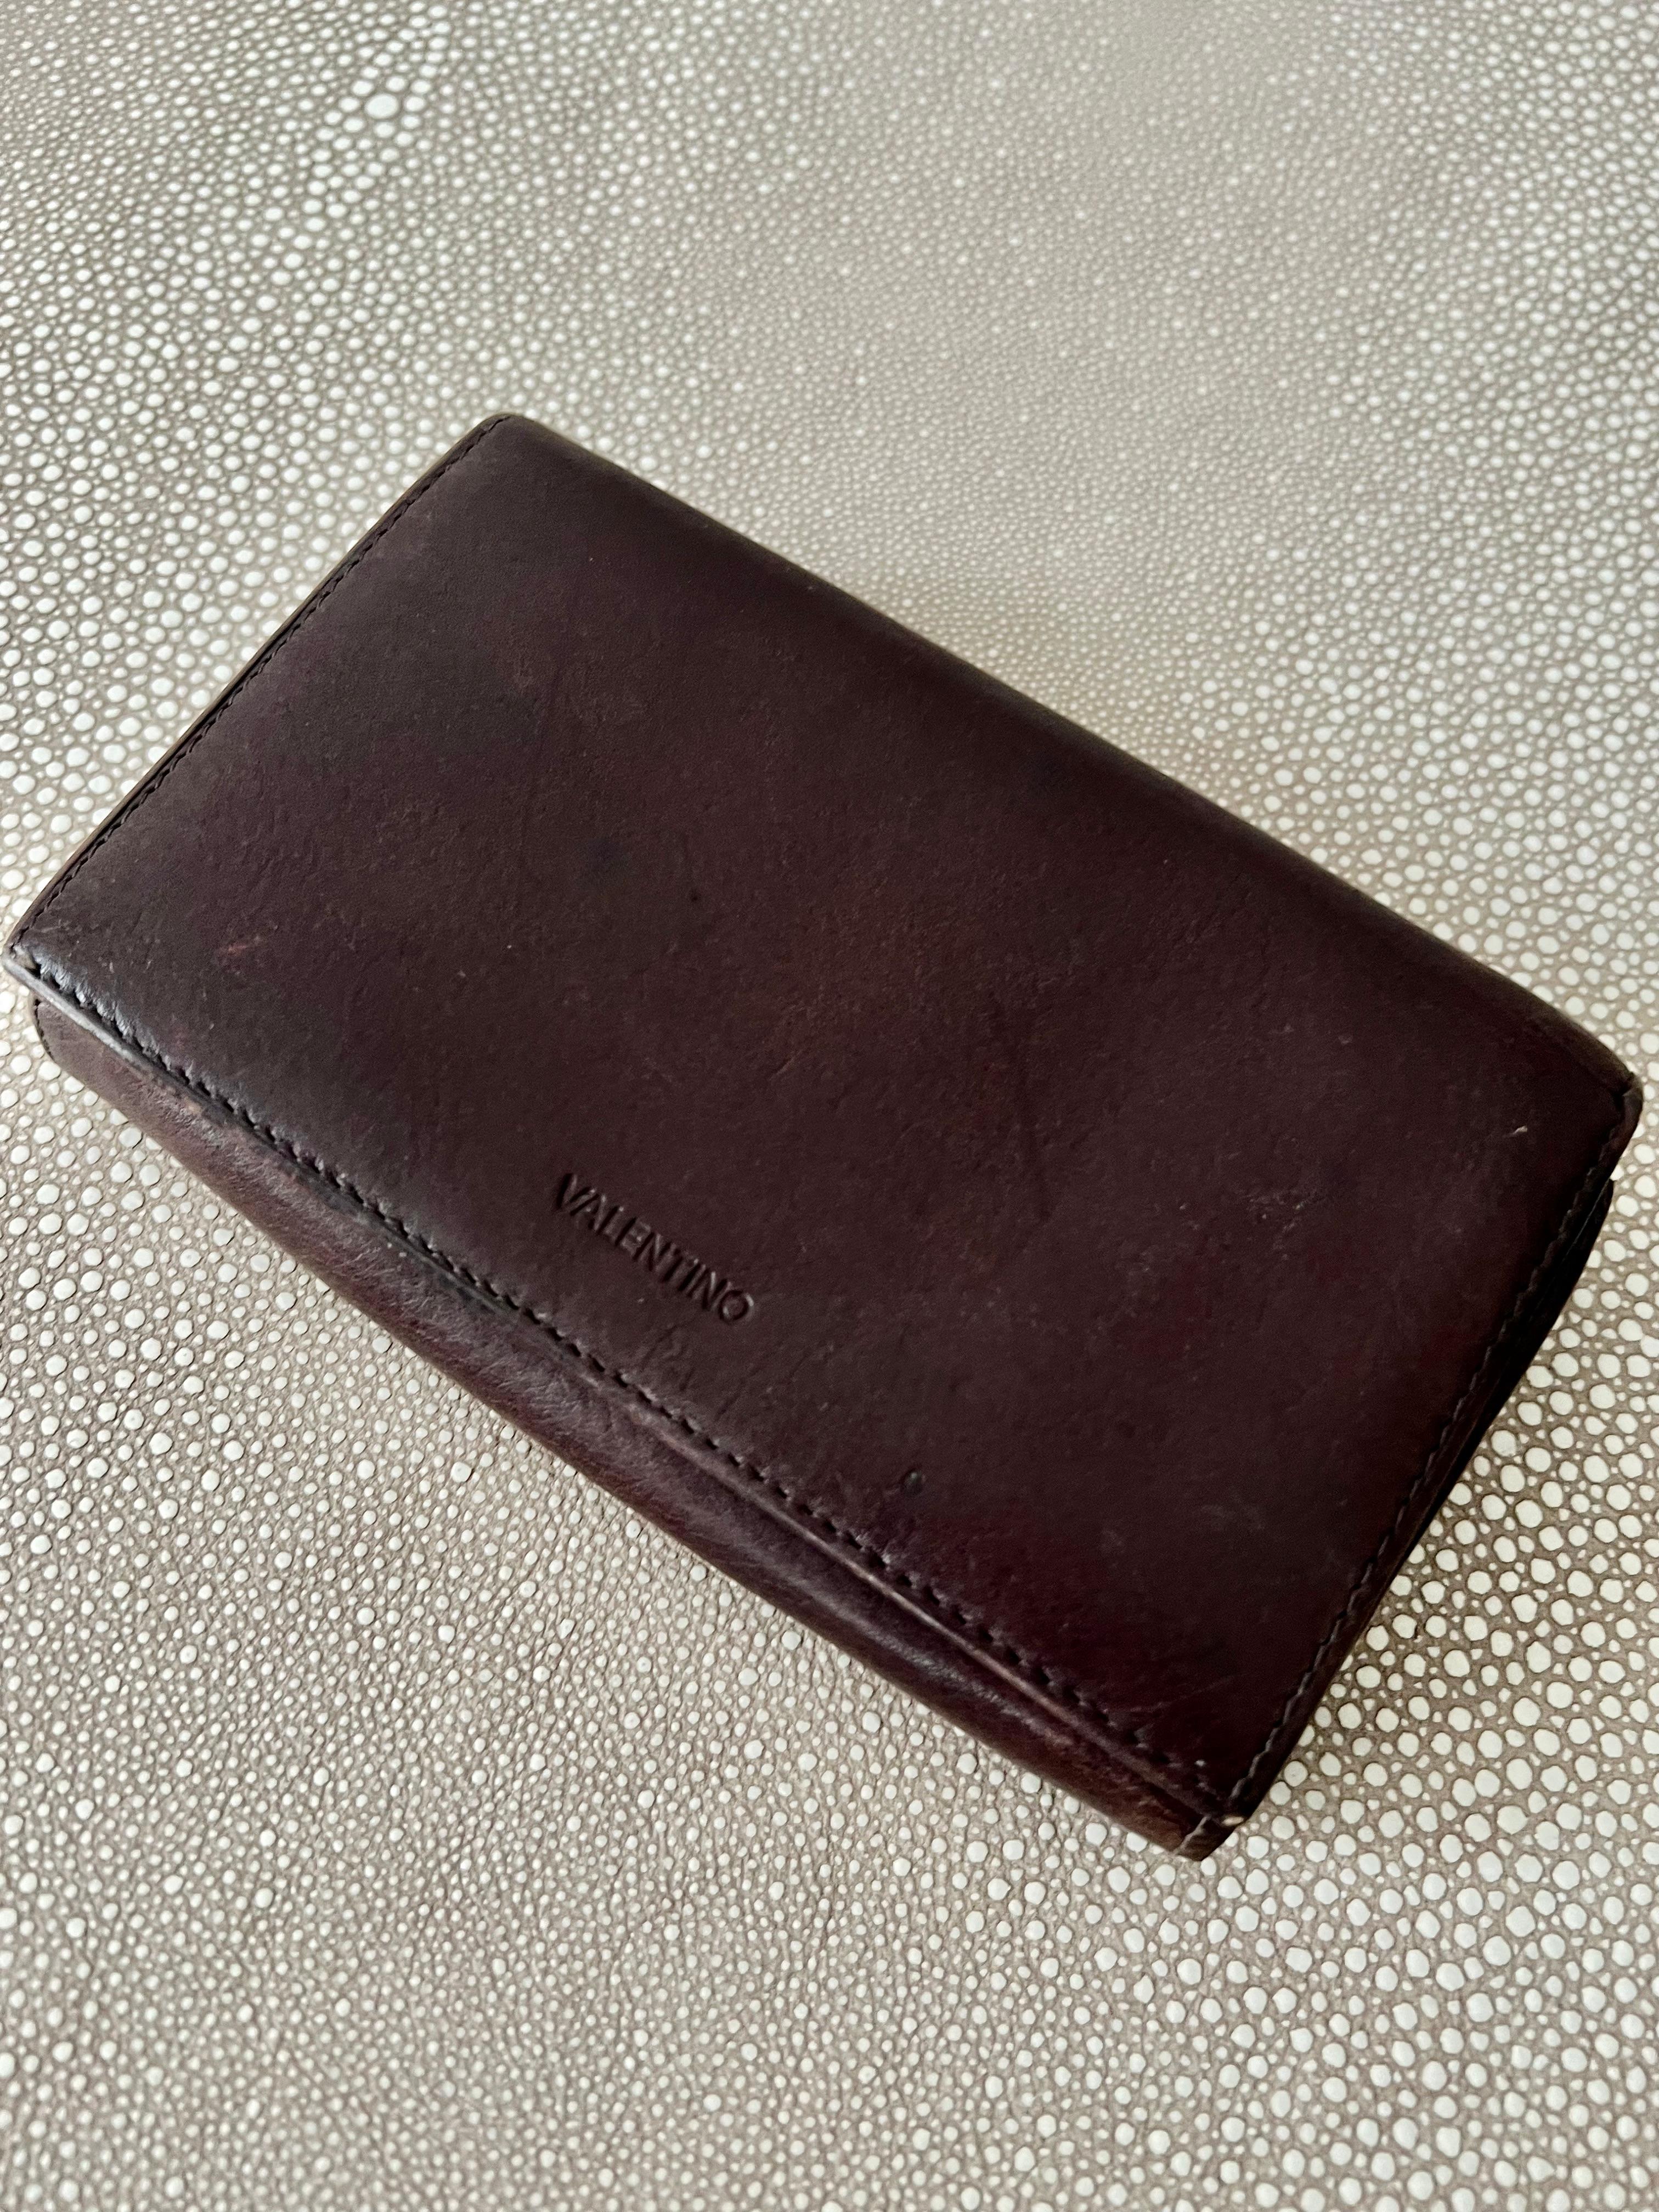 Fine Italian Valentino Leather wallet with notches for 8 credit cards, 6 pockets and two zippered areas for important papers or change and window for Identification.

The wallet is in very good used condition. A wonderful addition to your collection